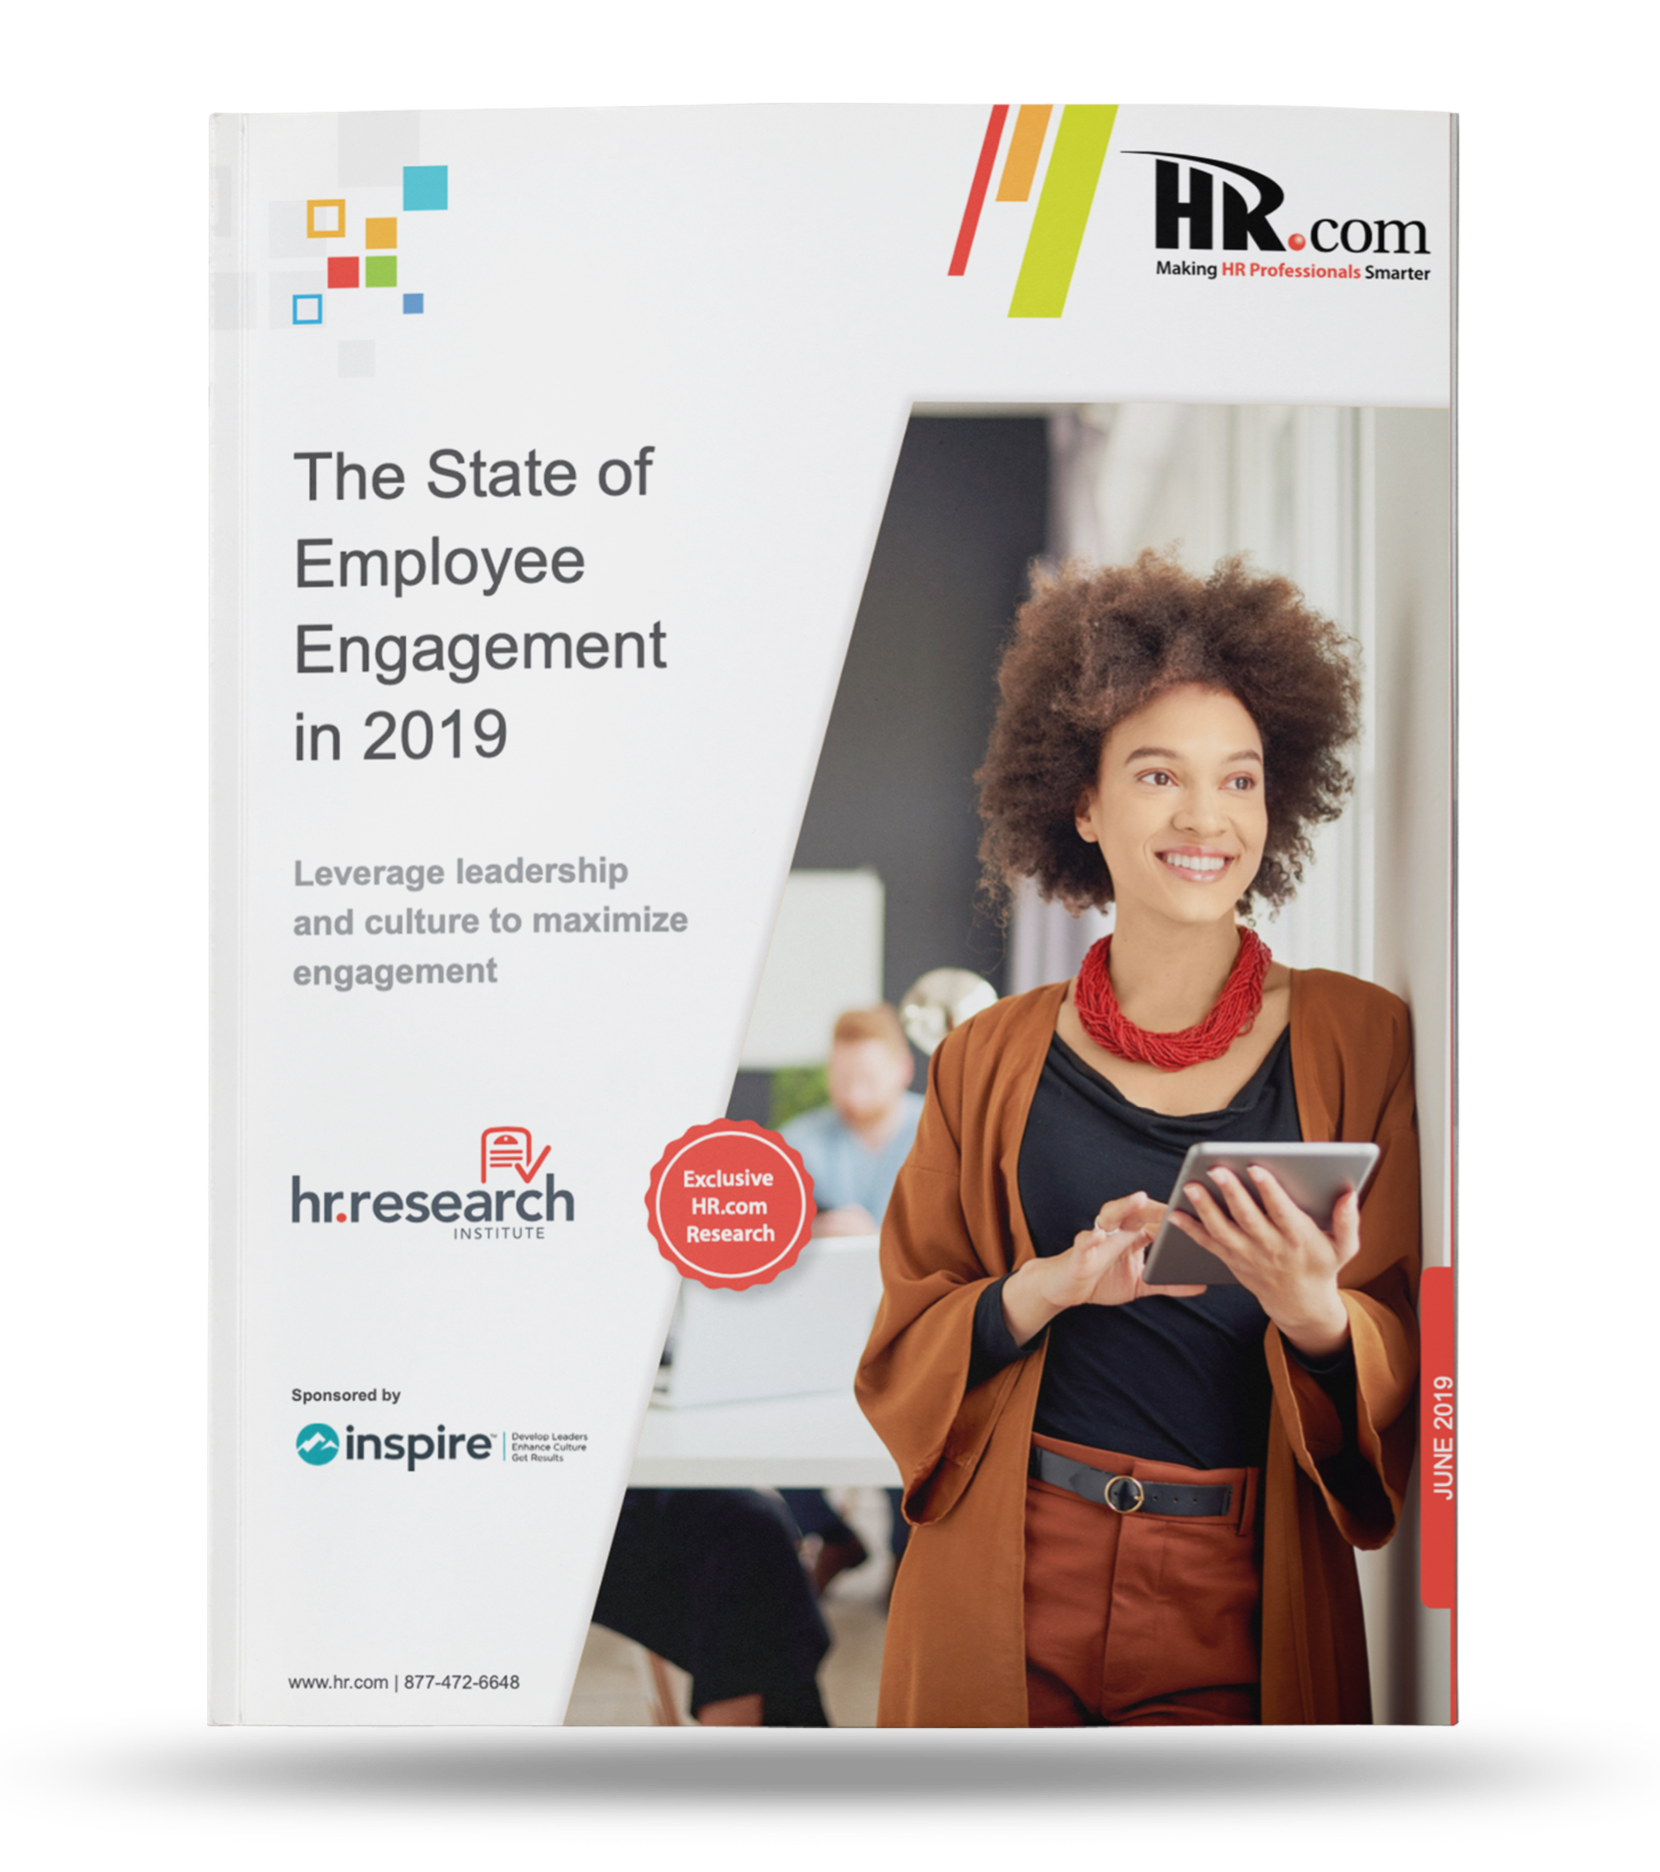 INSP-HR-State-of-Employee-Engagement-2019-Mockup